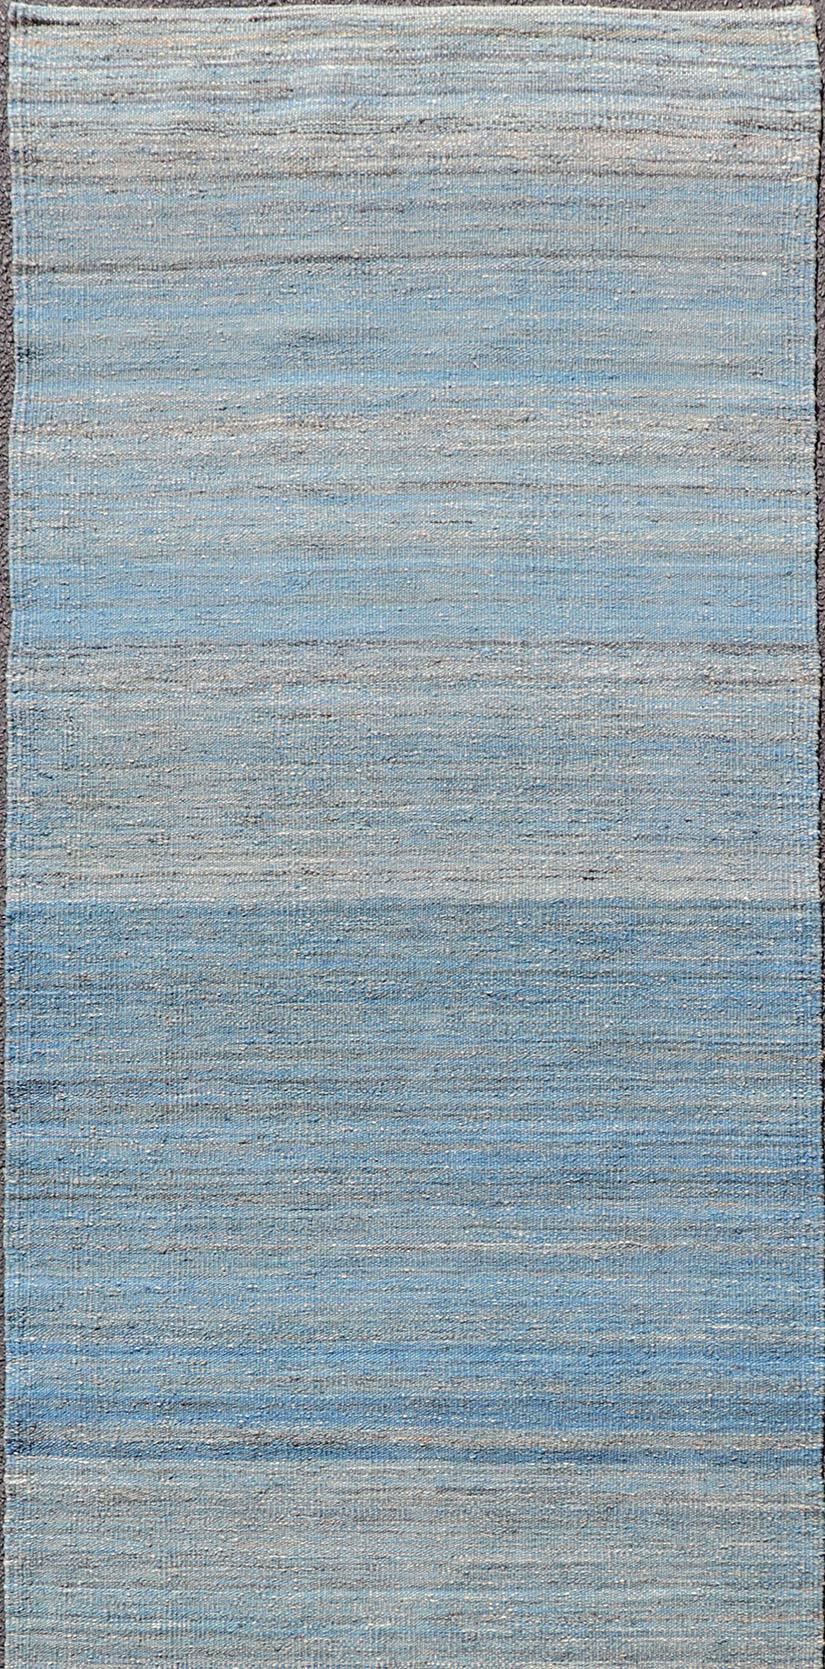 Flat-weave Kilim runner with Minimalist modern design in shades of blue, Green and Taupe, Keivan Woven Arts rug AFG-31974, country of origin / type: Afghanistan / Kilim

This modern design runner evokes casual and easy vibes. Perfect for modern